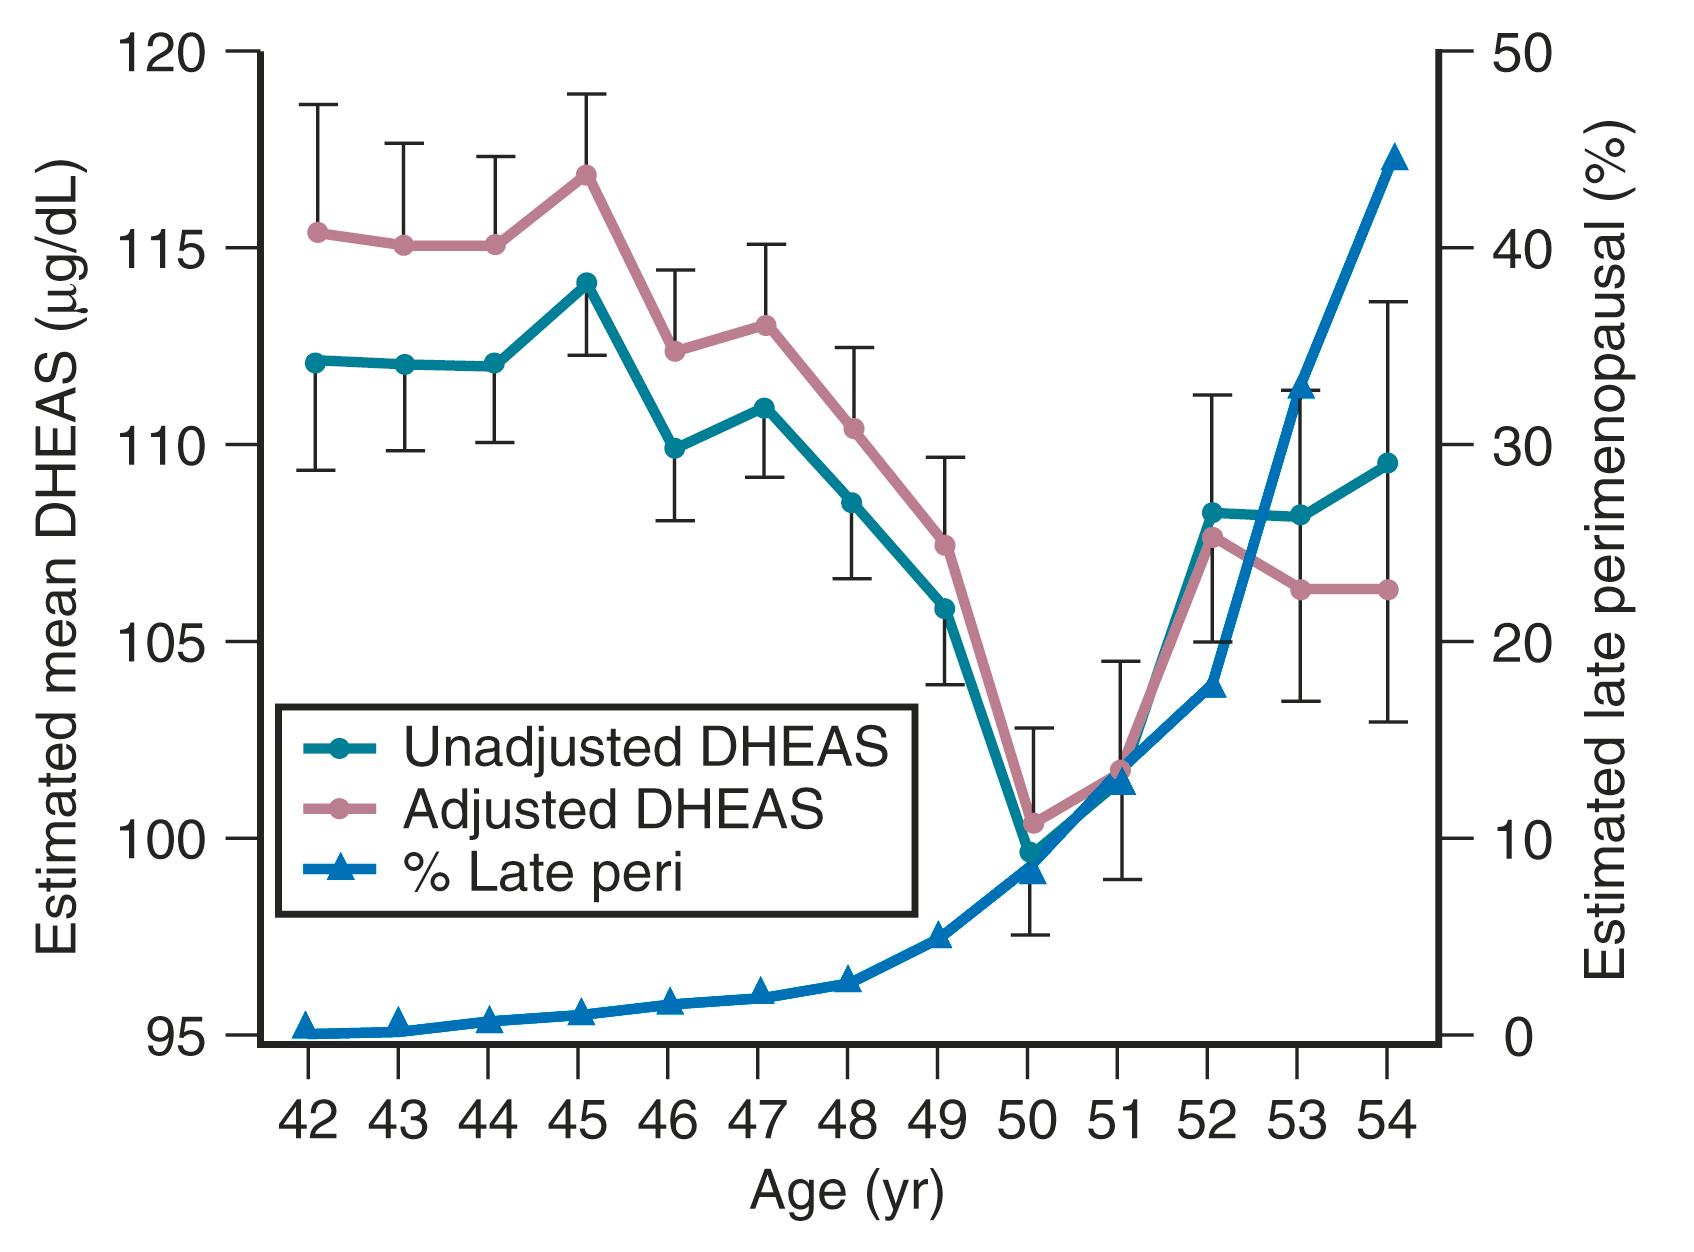 Fig. 14.10, Mean (±SE) circulating dehydroepiandrosterone sulfate (DHEAS) at each year of age of the entire study population before and after adjustment for age, current smoking, menopausal status, log body mass index (BMI) , ethnicity, site, and the interaction between ethnicity and log BMI.